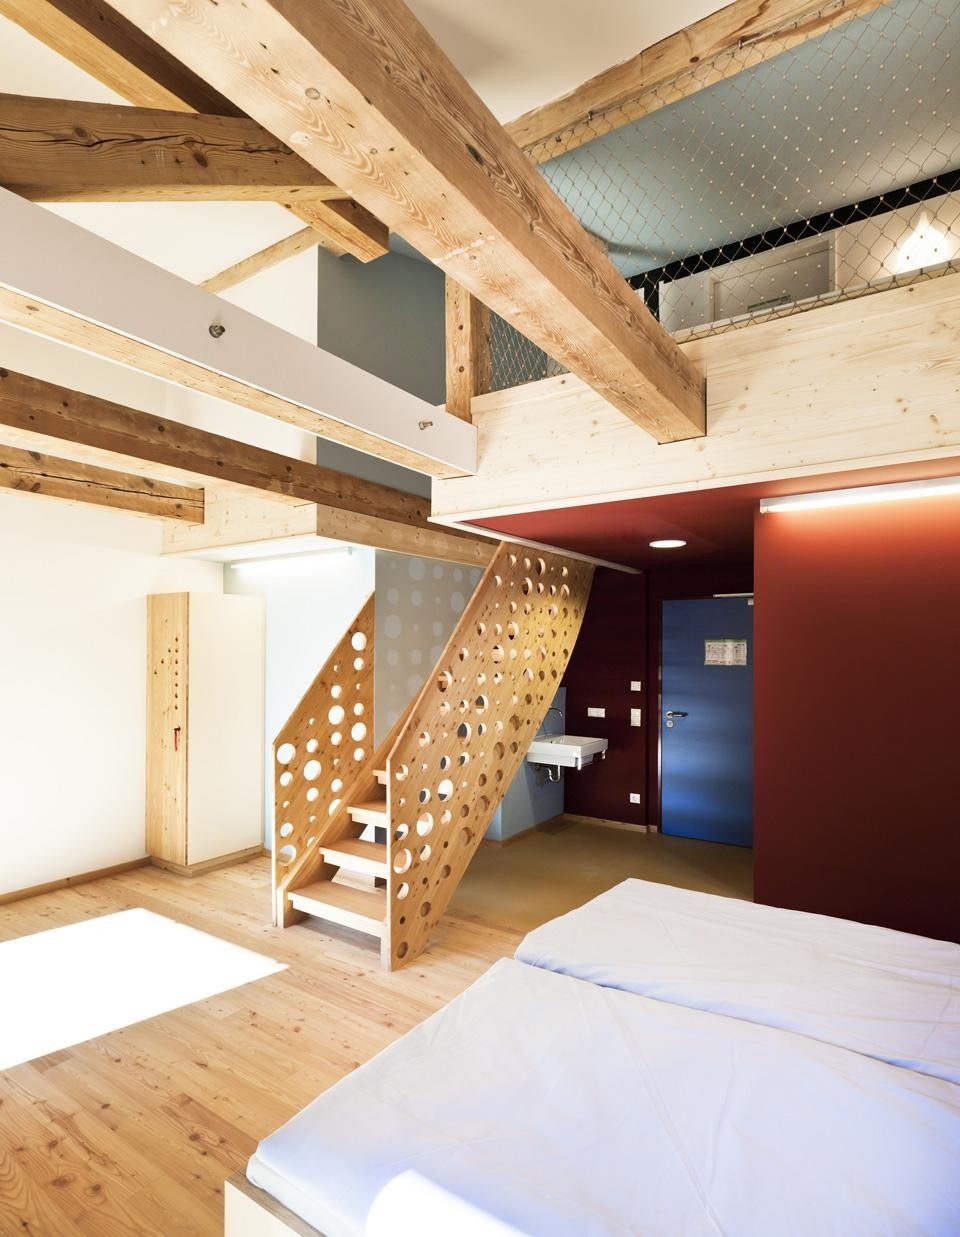 Unused space under the attic becomes a mezzanine level with additional beds
open to the spaces below